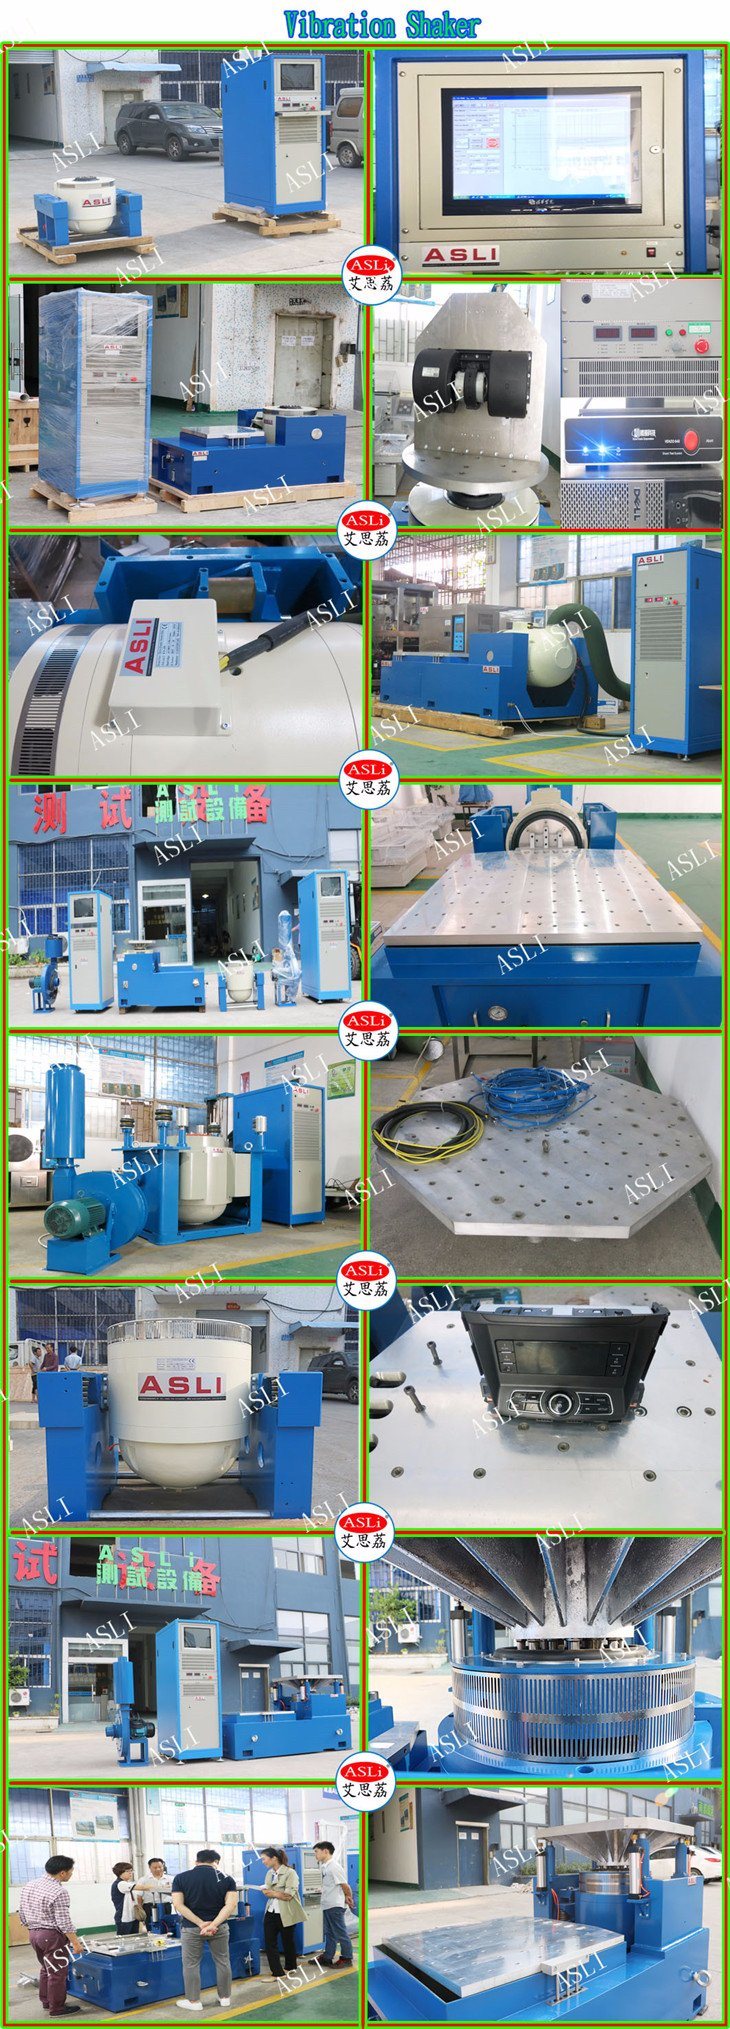 High Quality Electrodynamics Vibration Shaker Table in Testing Equipment